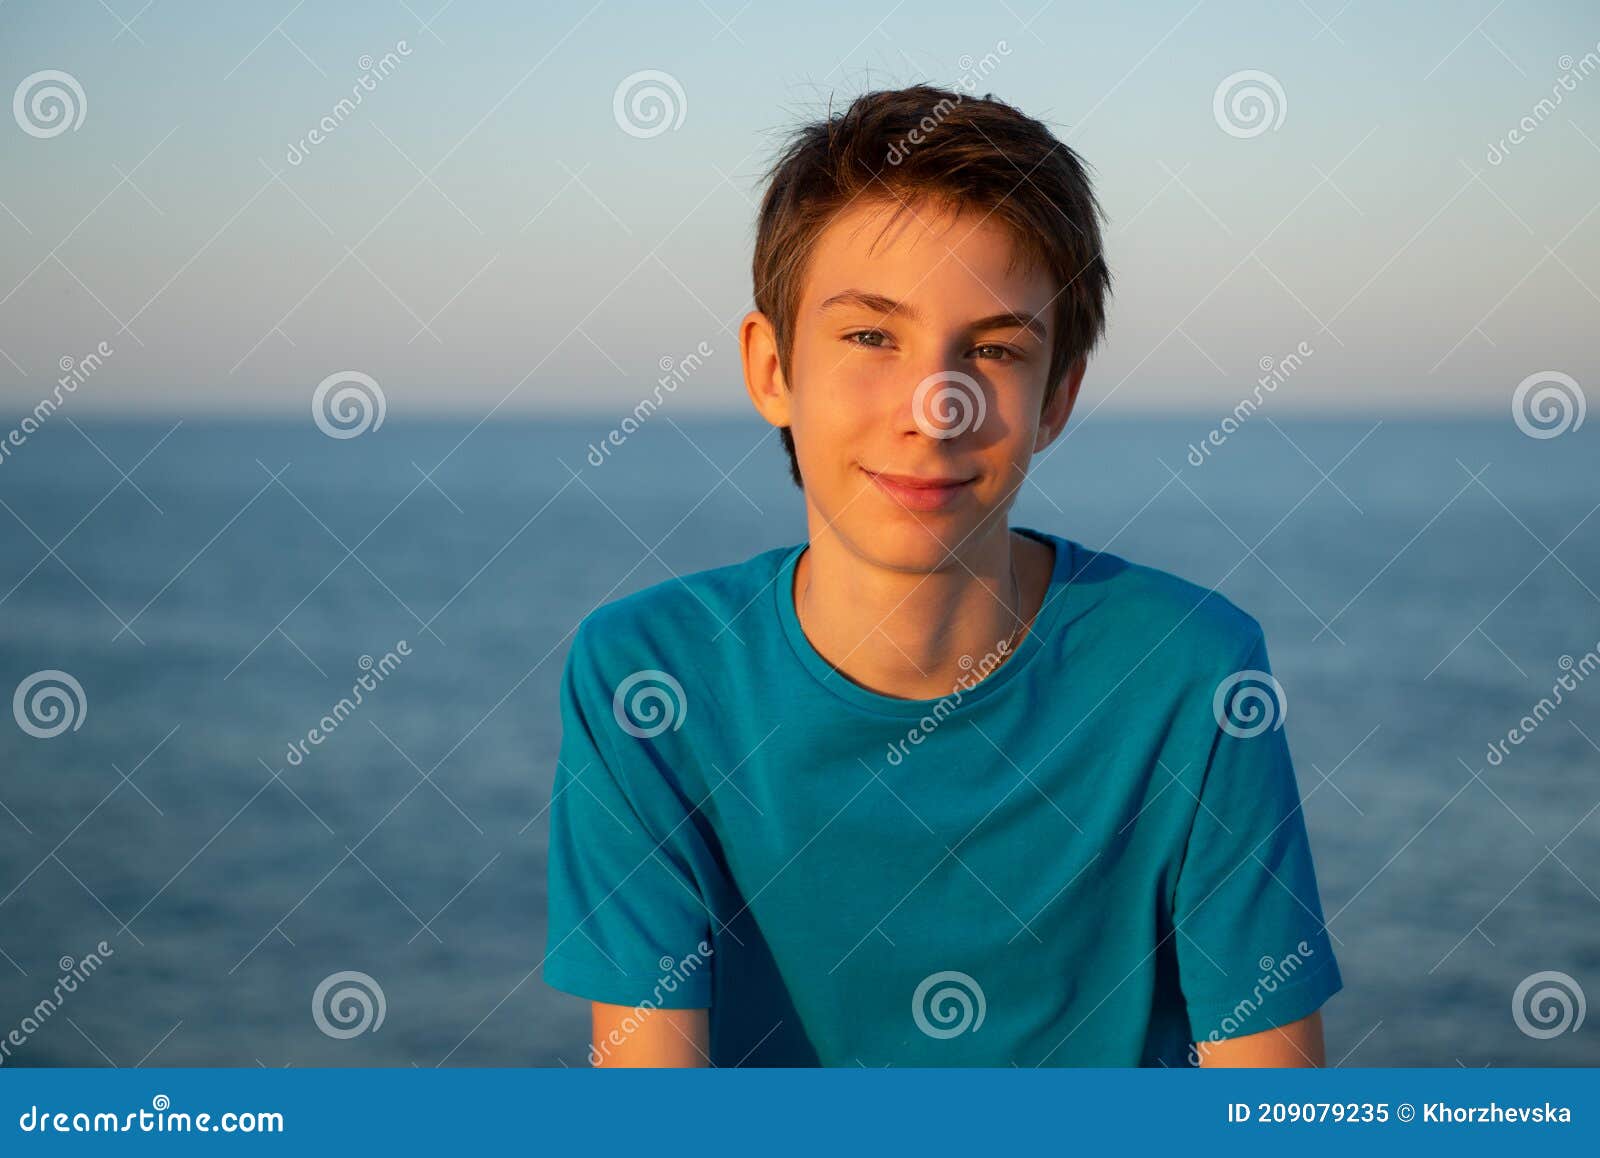 Handsome Young Boy at Beach. Beautiful Calm Smiling Teen Boy at ...